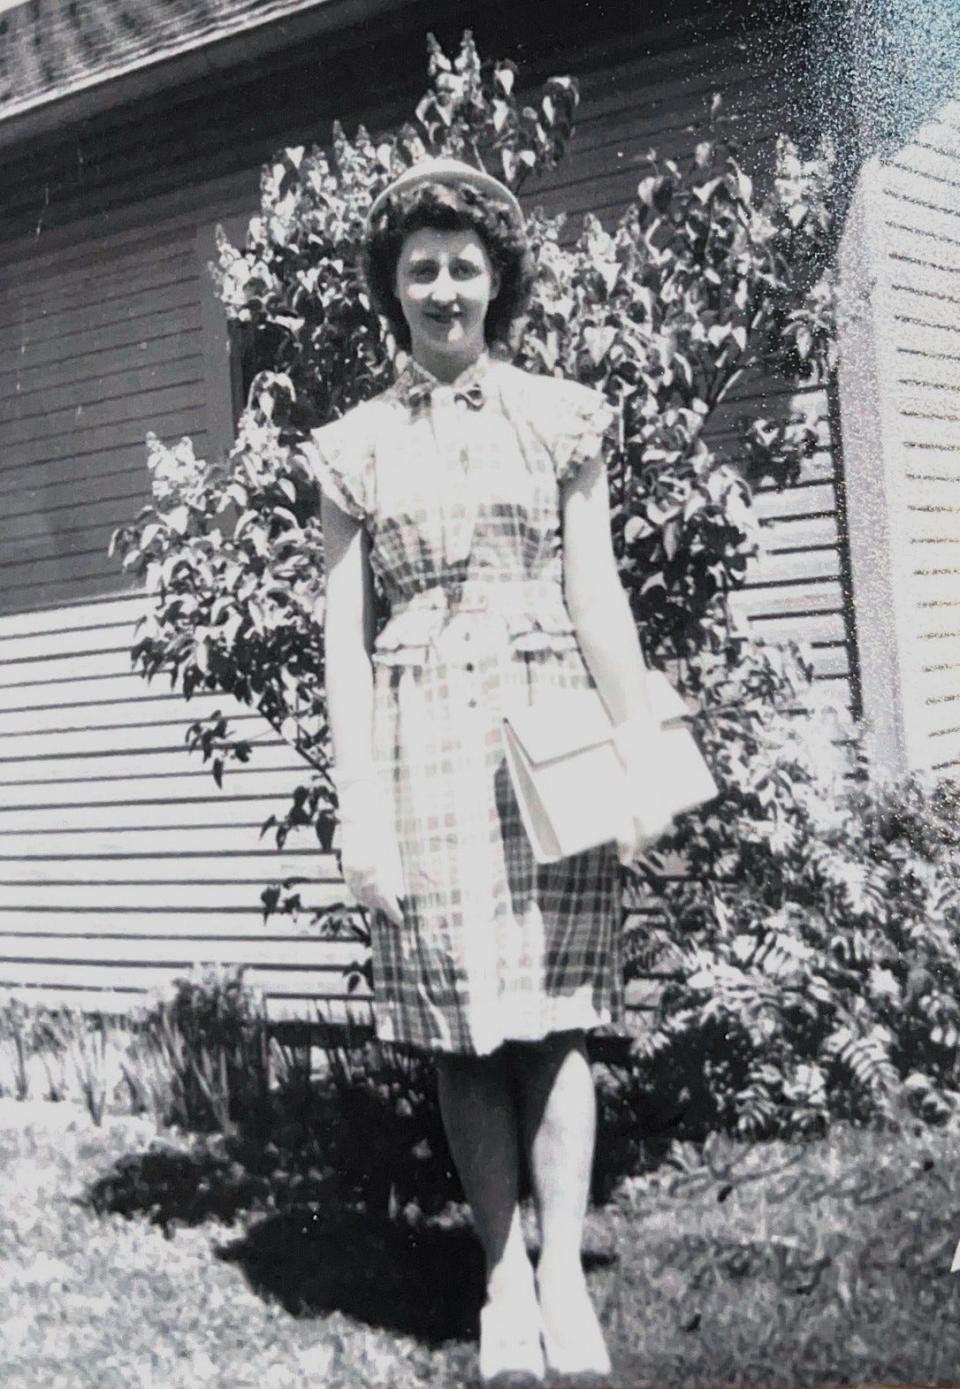 Mary Ellen Dune as a teenager before heading to church on Easter. Faith has been an important part of her life.